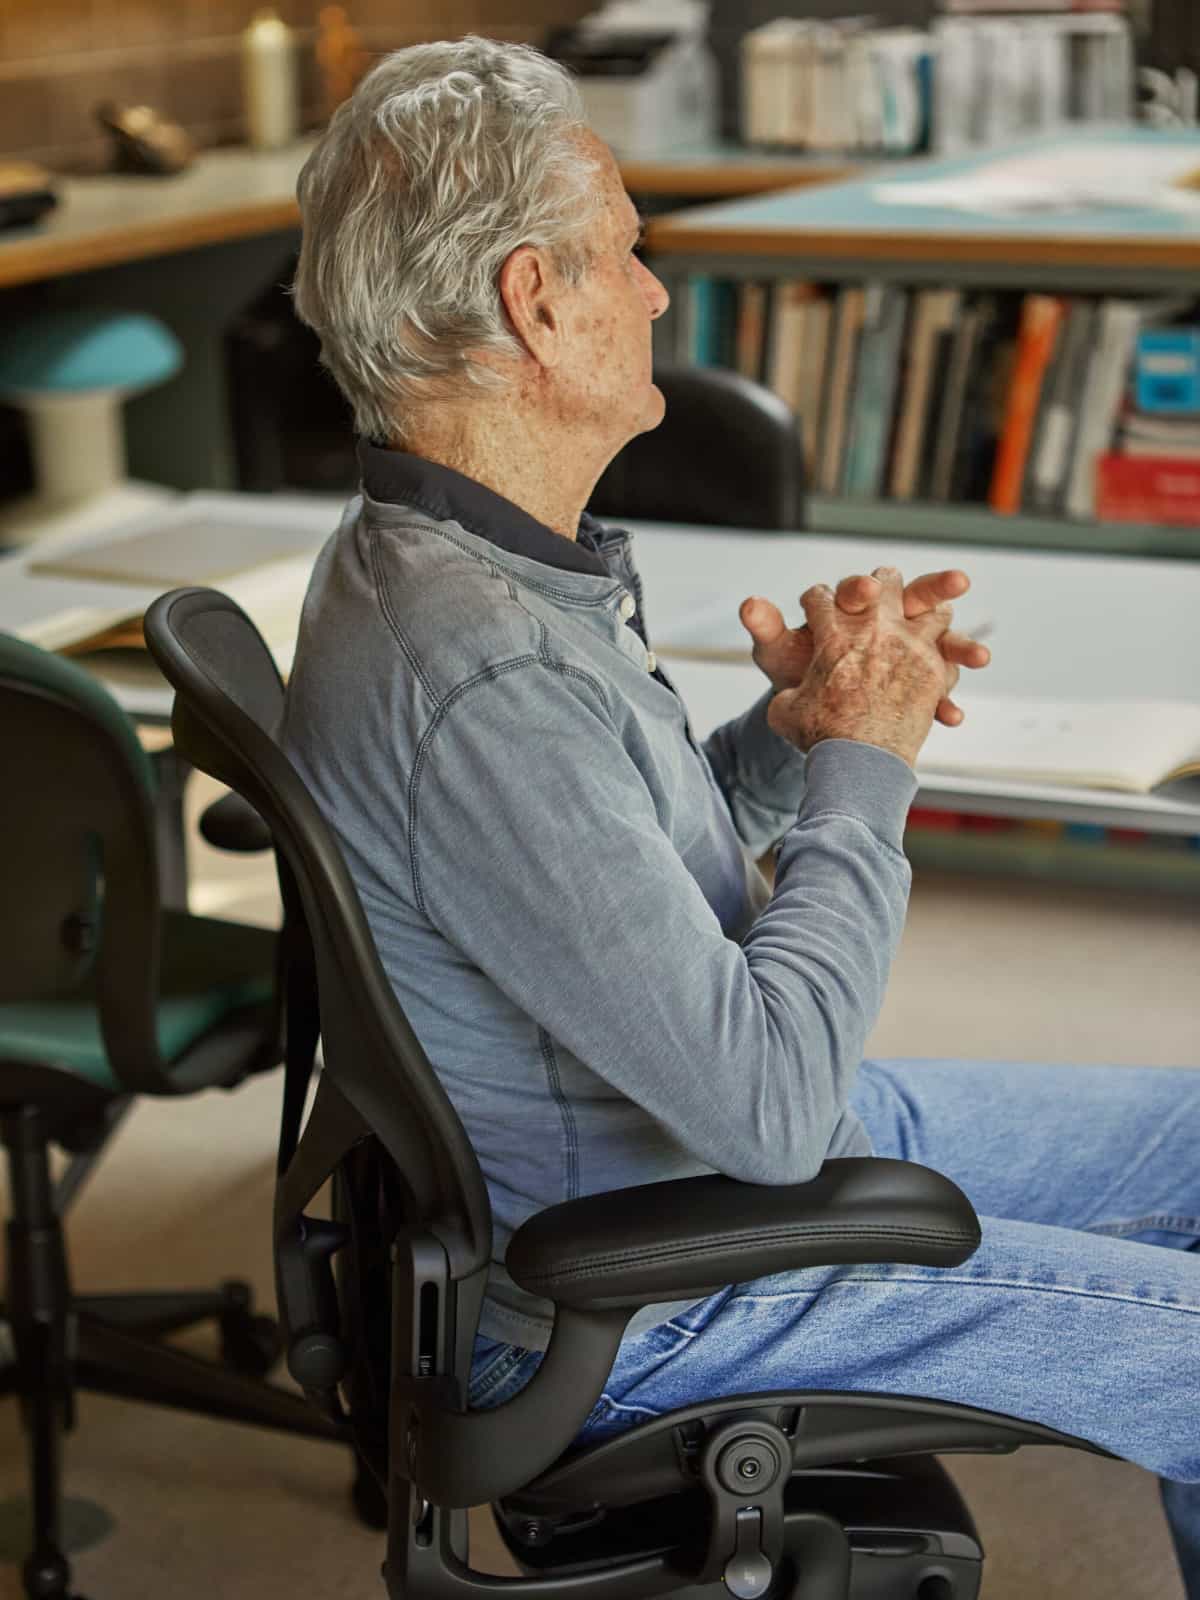 A side view of Don Chadwick sitting in the re-engineered Aeron Chair in Onyx Ultra Matte color.